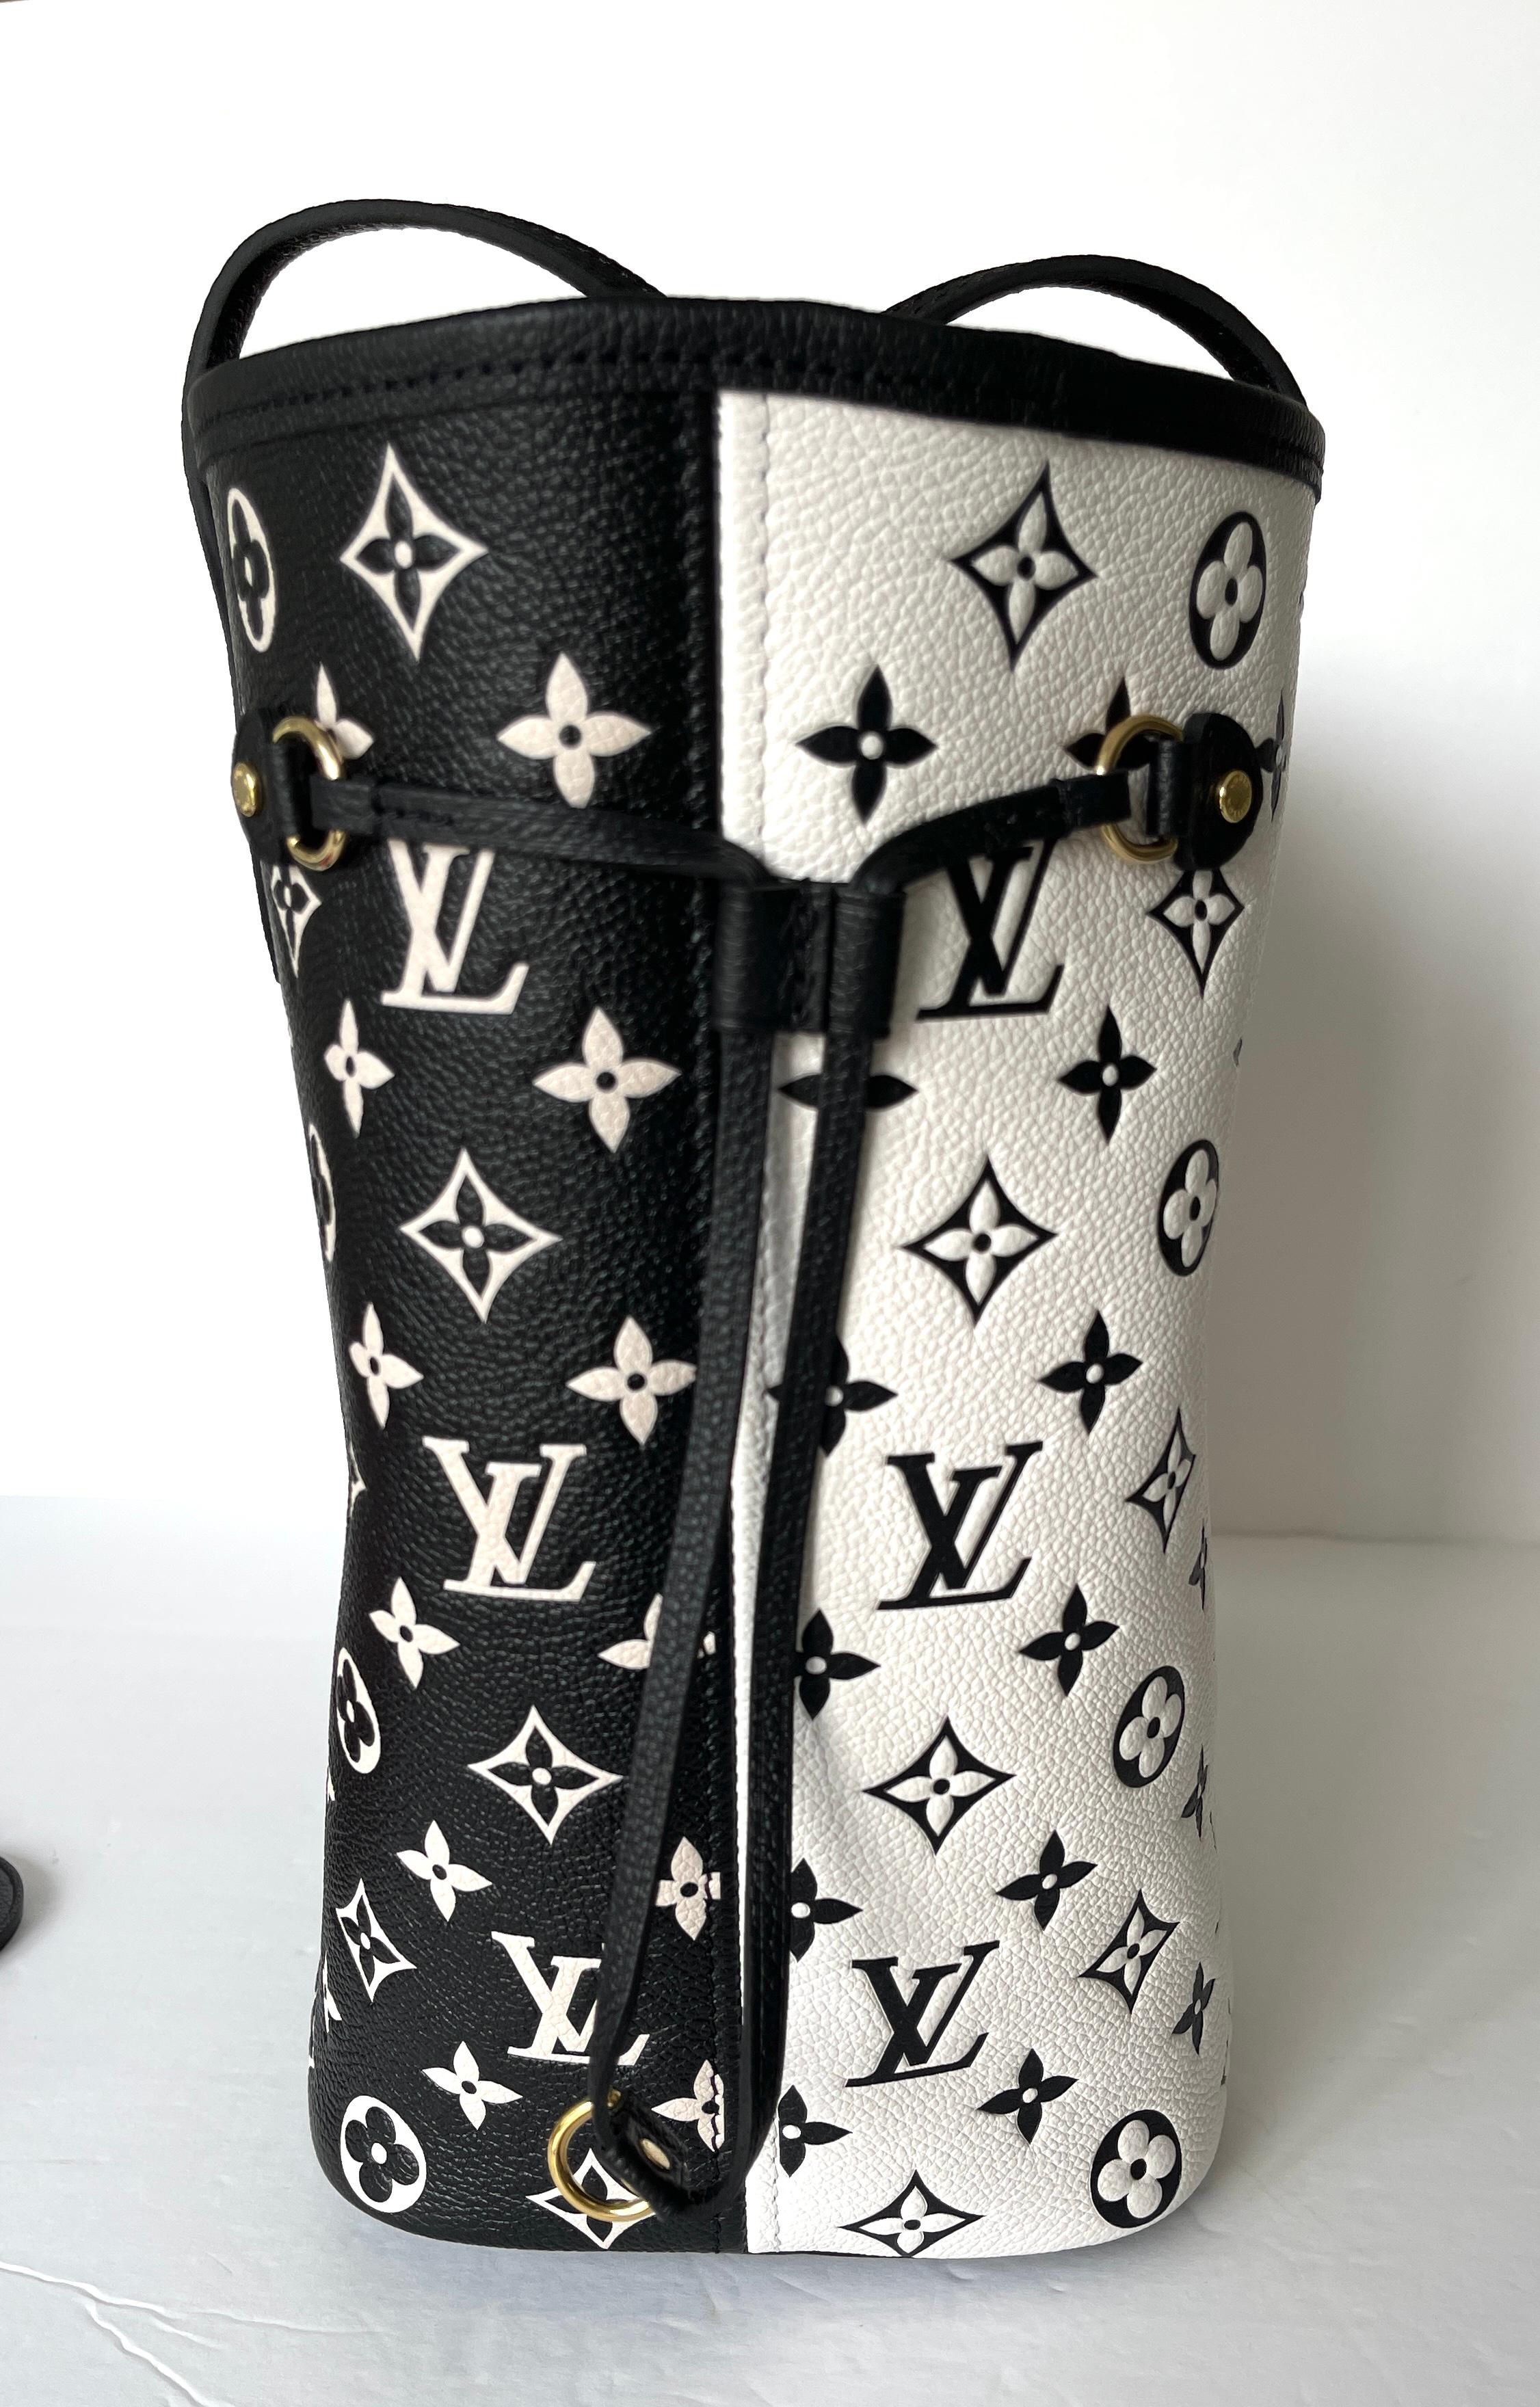 Louis Vuitton Neverfull Black White Empriente Leather M46103 NEVERFULL MM 7